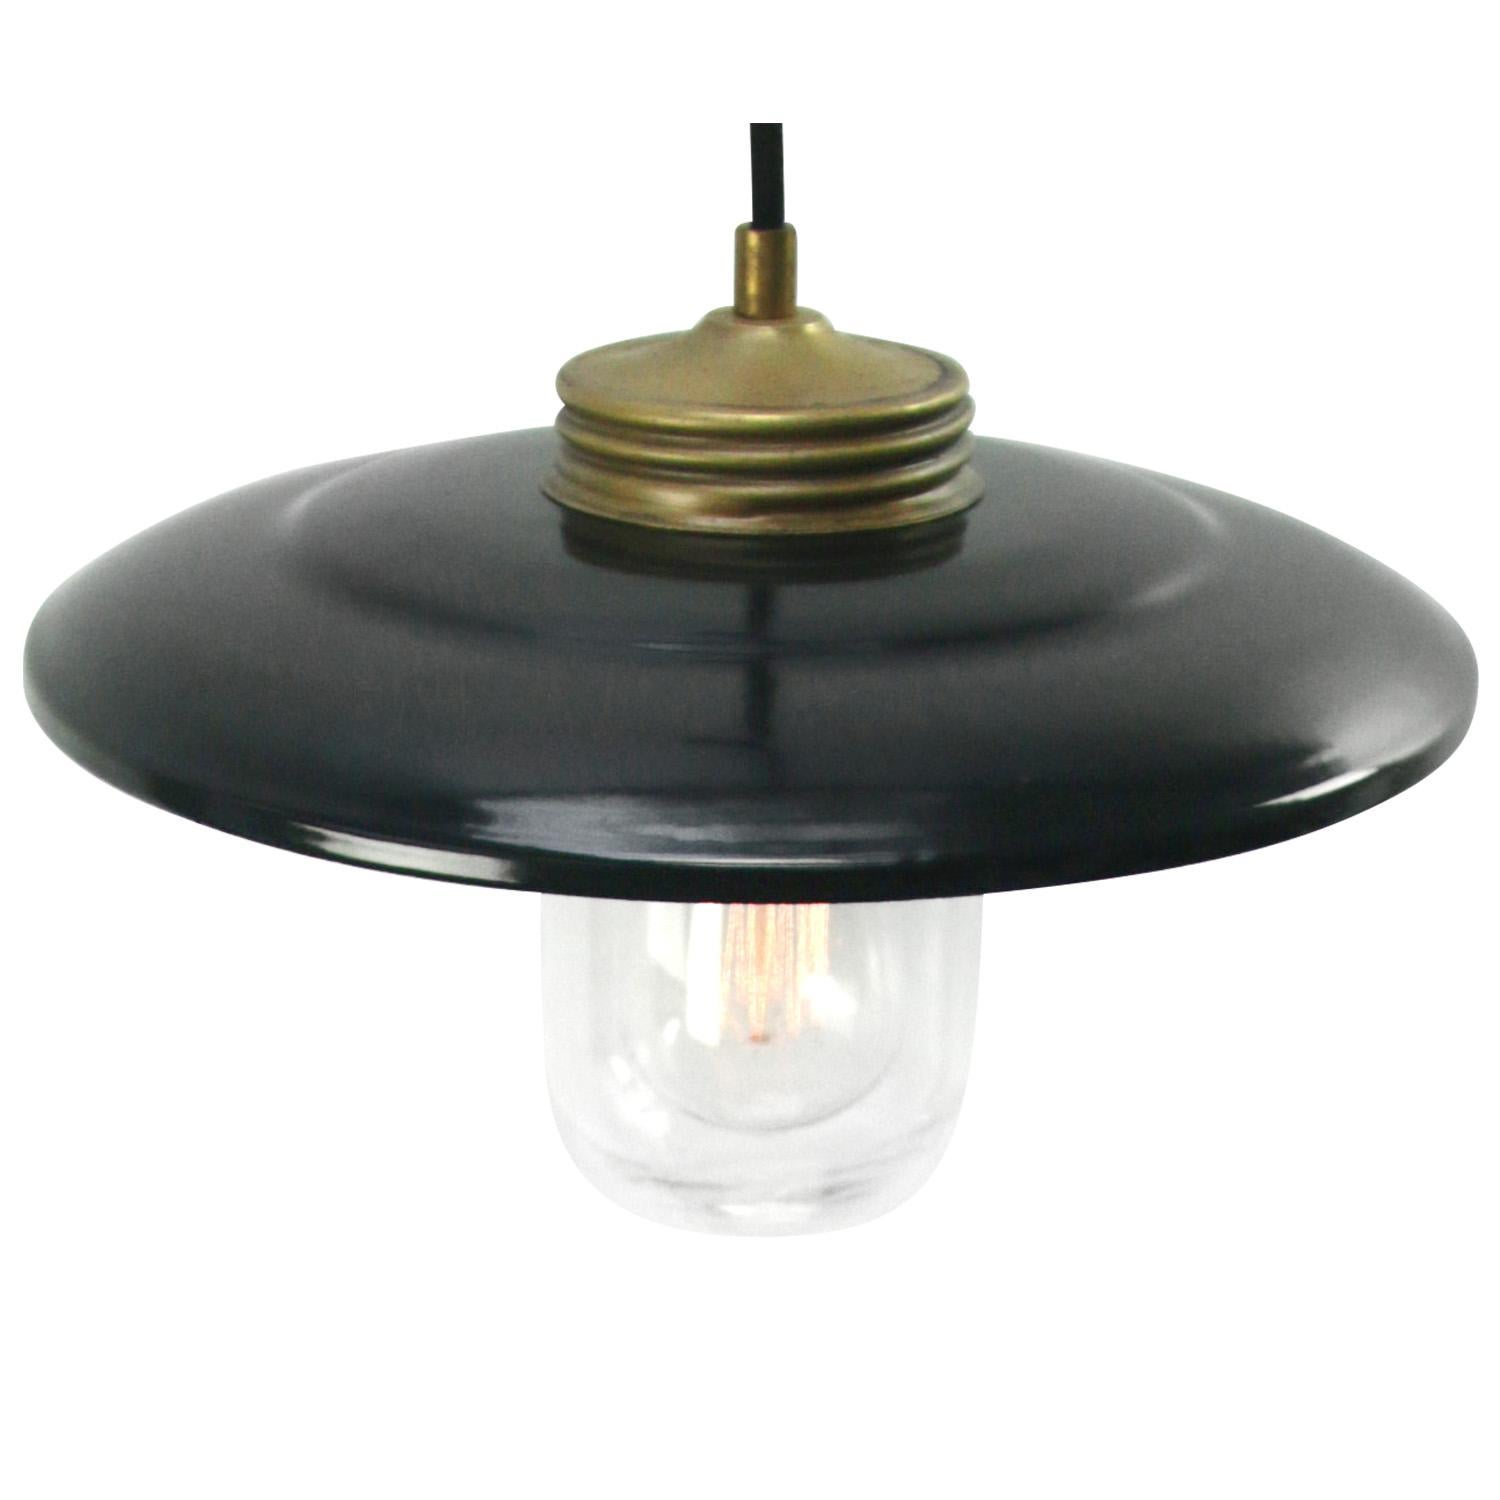 Black enamel Industrial hanging lamp.
Clear glass with brass top.

Weight: 1.30 kg / 2.9 lb

Priced per individual item. All lamps have been made suitable by international standards for incandescent light bulbs, energy-efficient and LED bulbs.